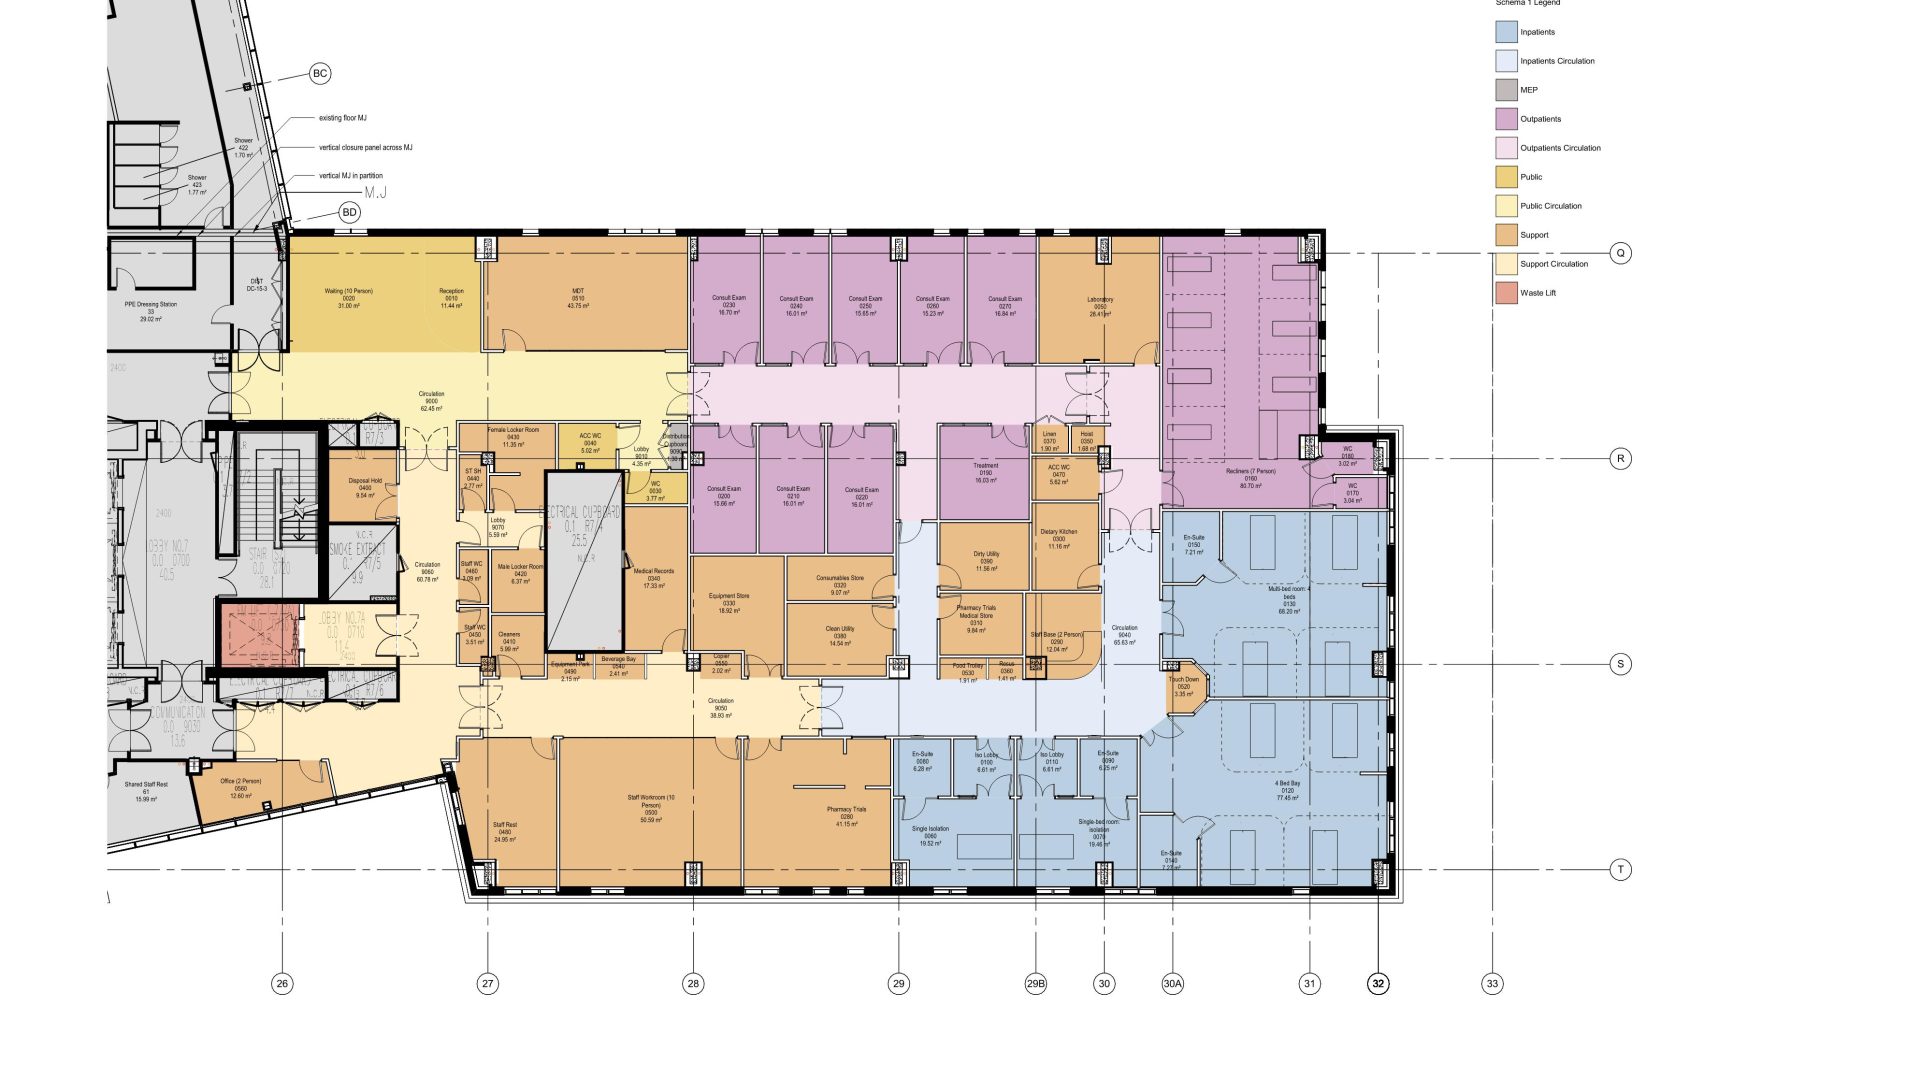 Architectural plan showing room plans for the new Clinical Research Facility